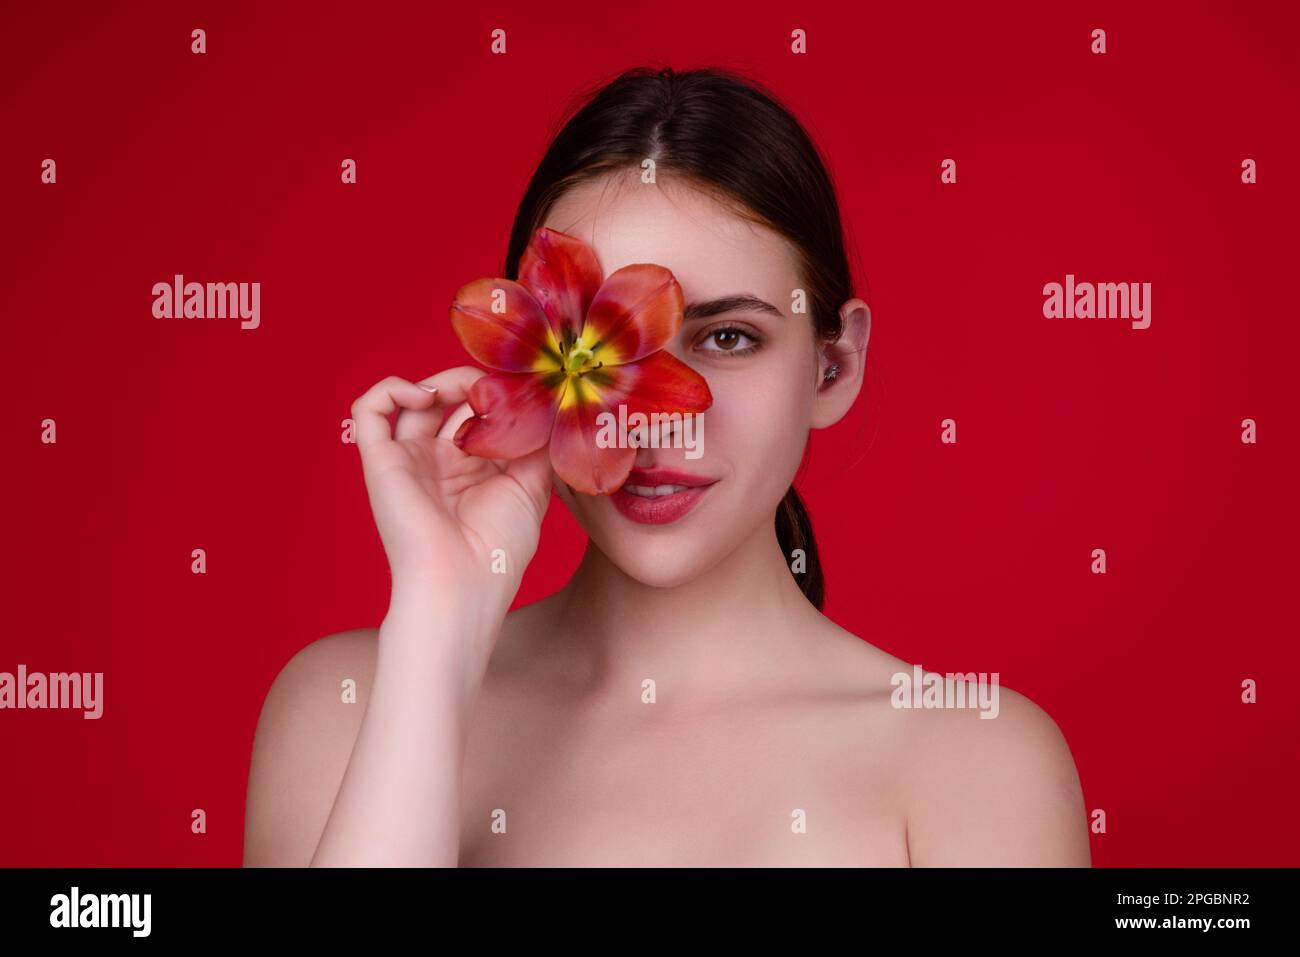 Beauty girl with tulip near face. Beautiful sensual woman hold tulips, studio portrait on red background. Stock Photo